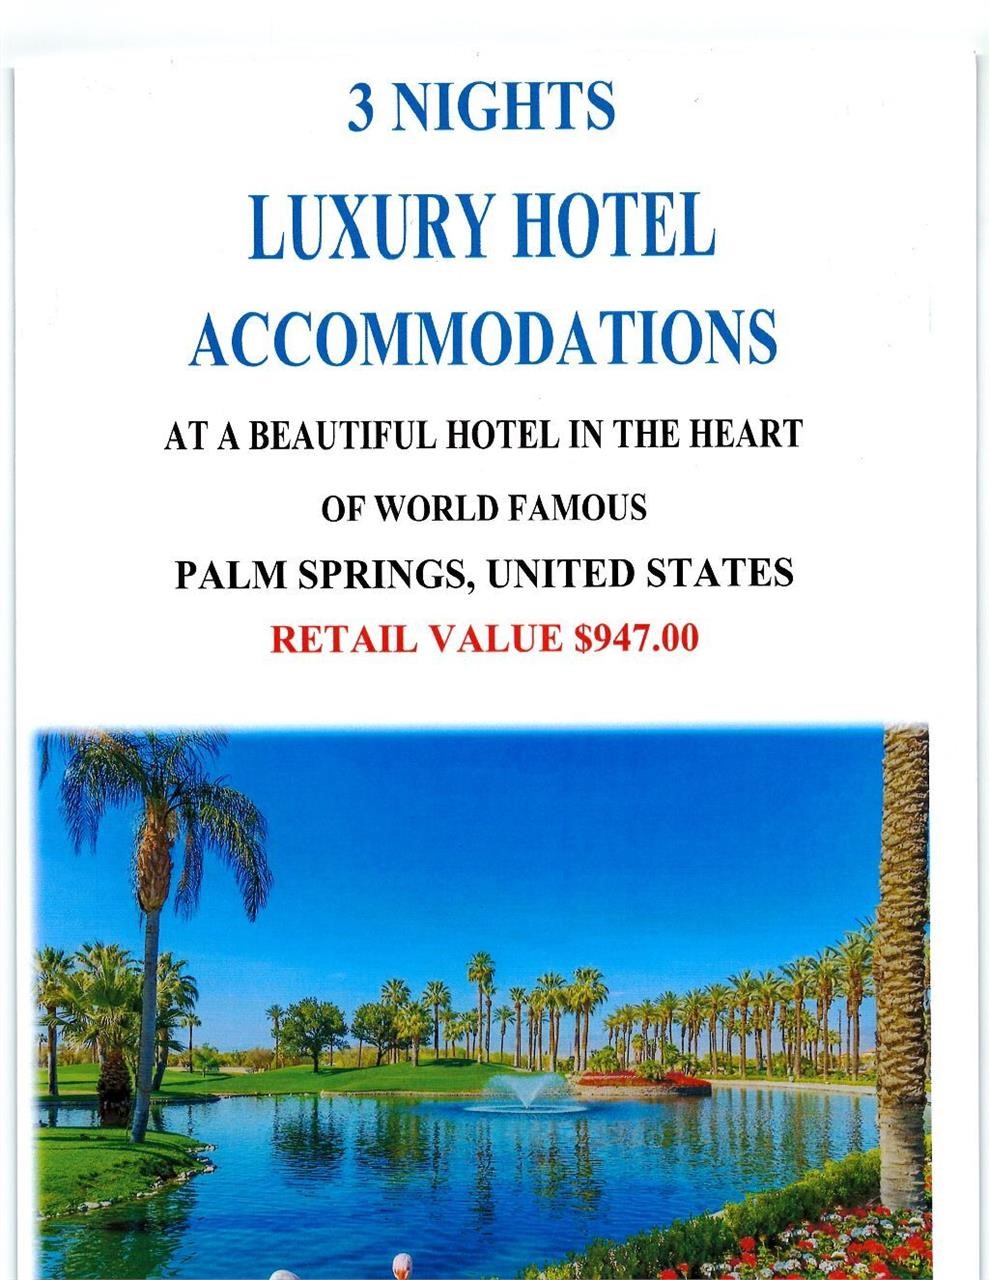 July 11TH. Vacation Hotel Accommodation Packages Auction